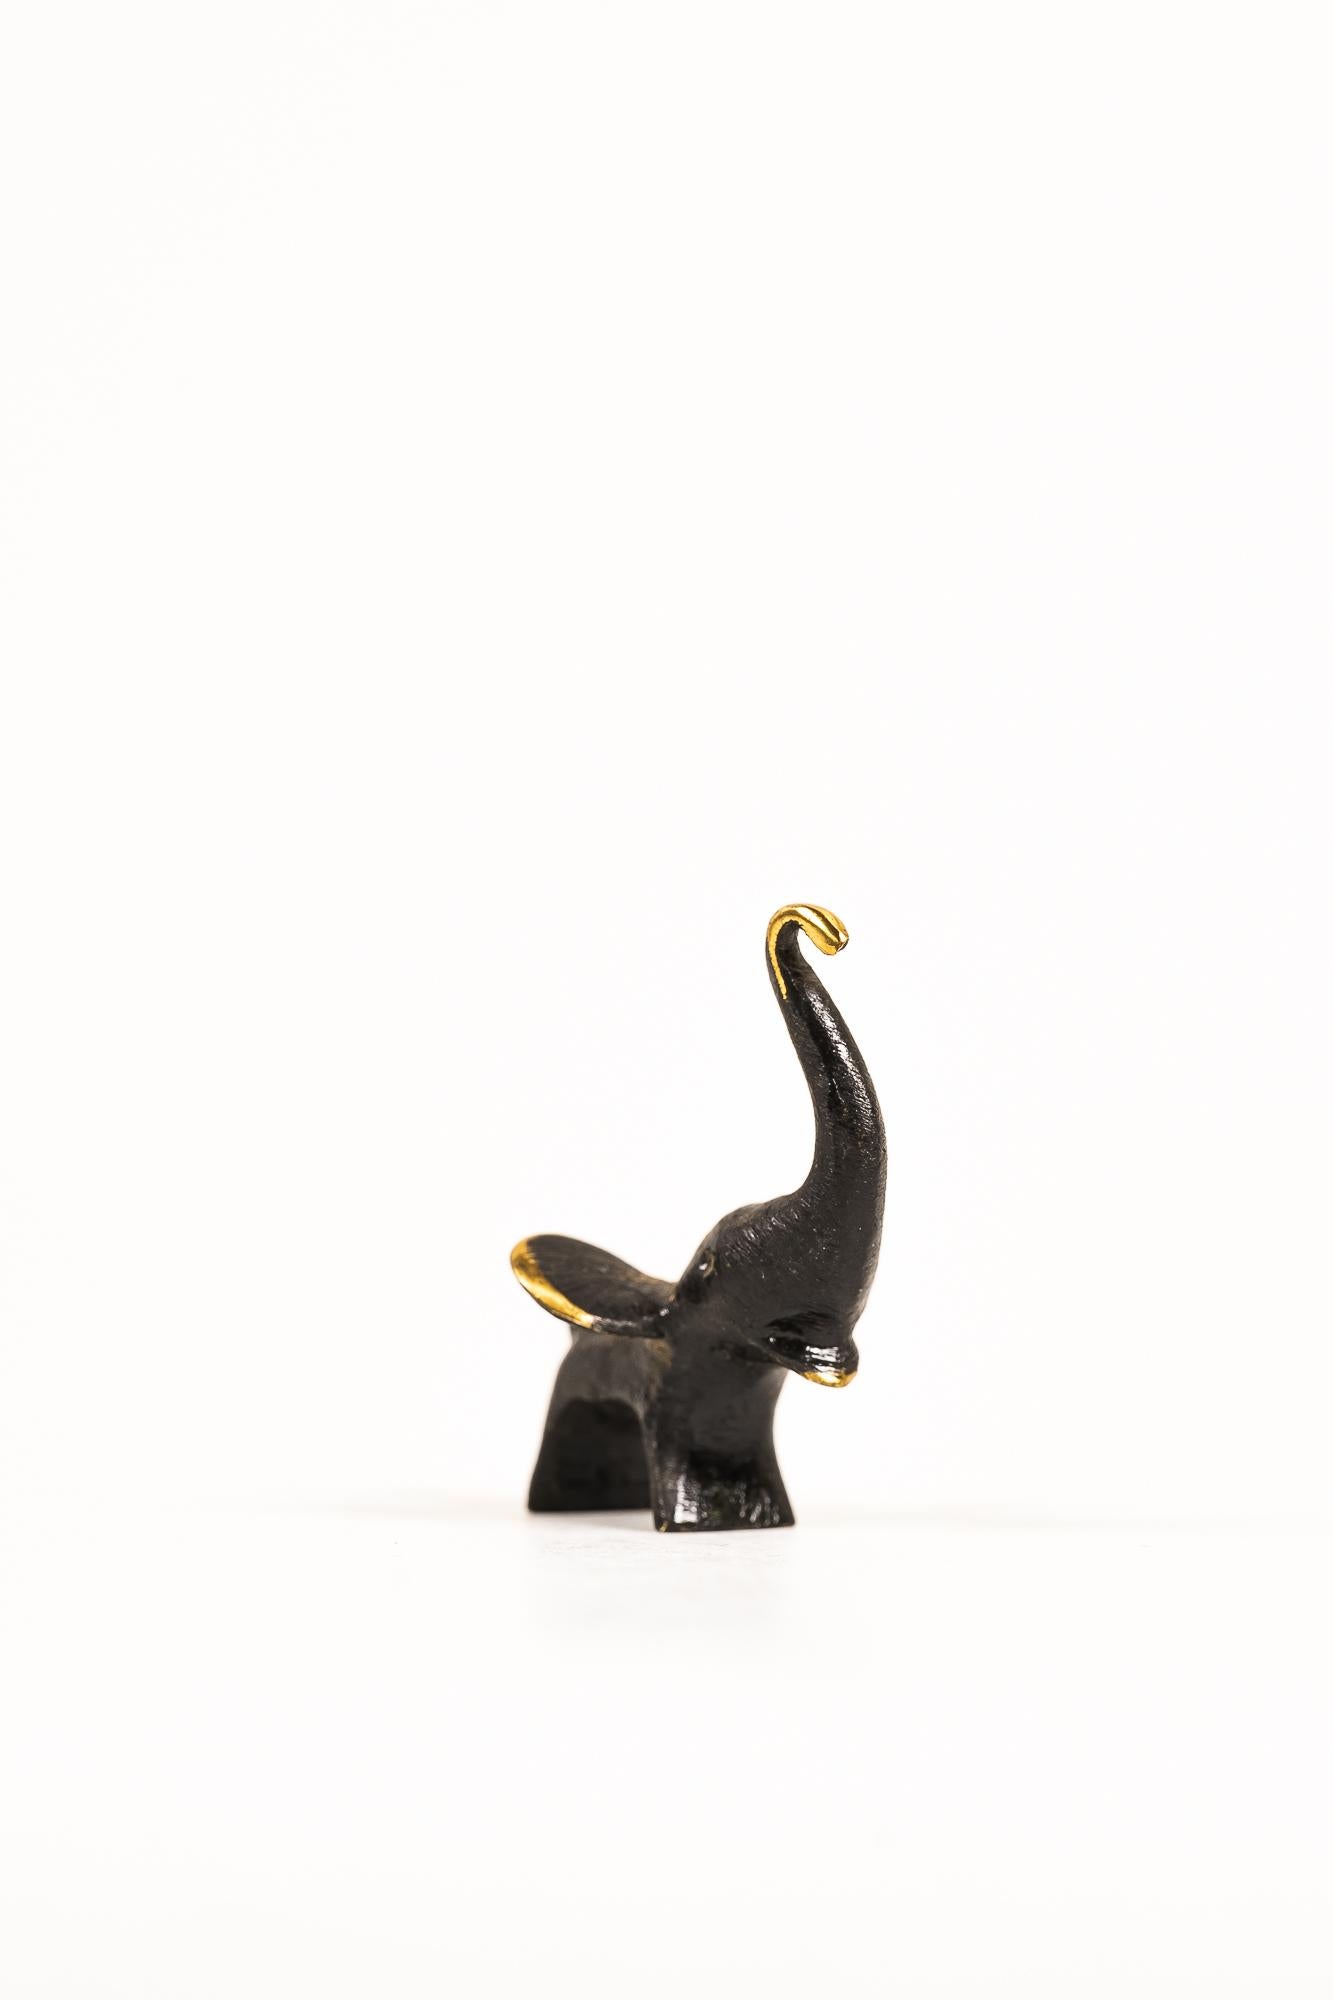 Blackened Very Small Elephant Figurine by Walter Bosse, Around 1950s For Sale